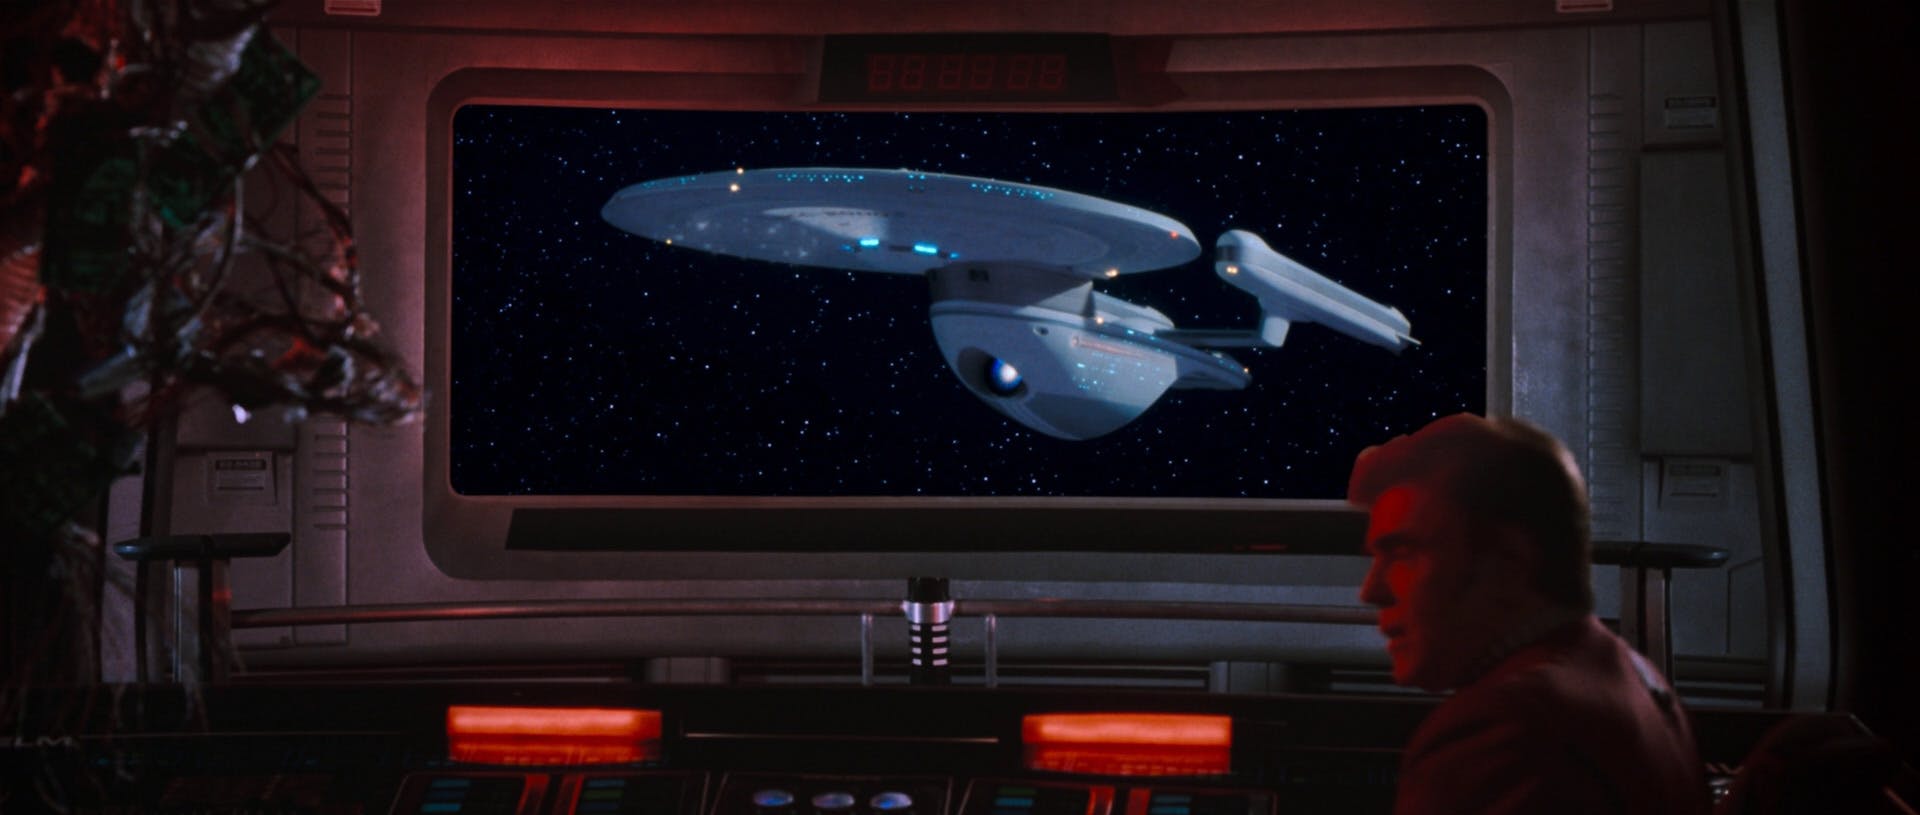 The Excelsior appears on the Enterprise viewscreen in Star Trek VI: The Undiscovered Country